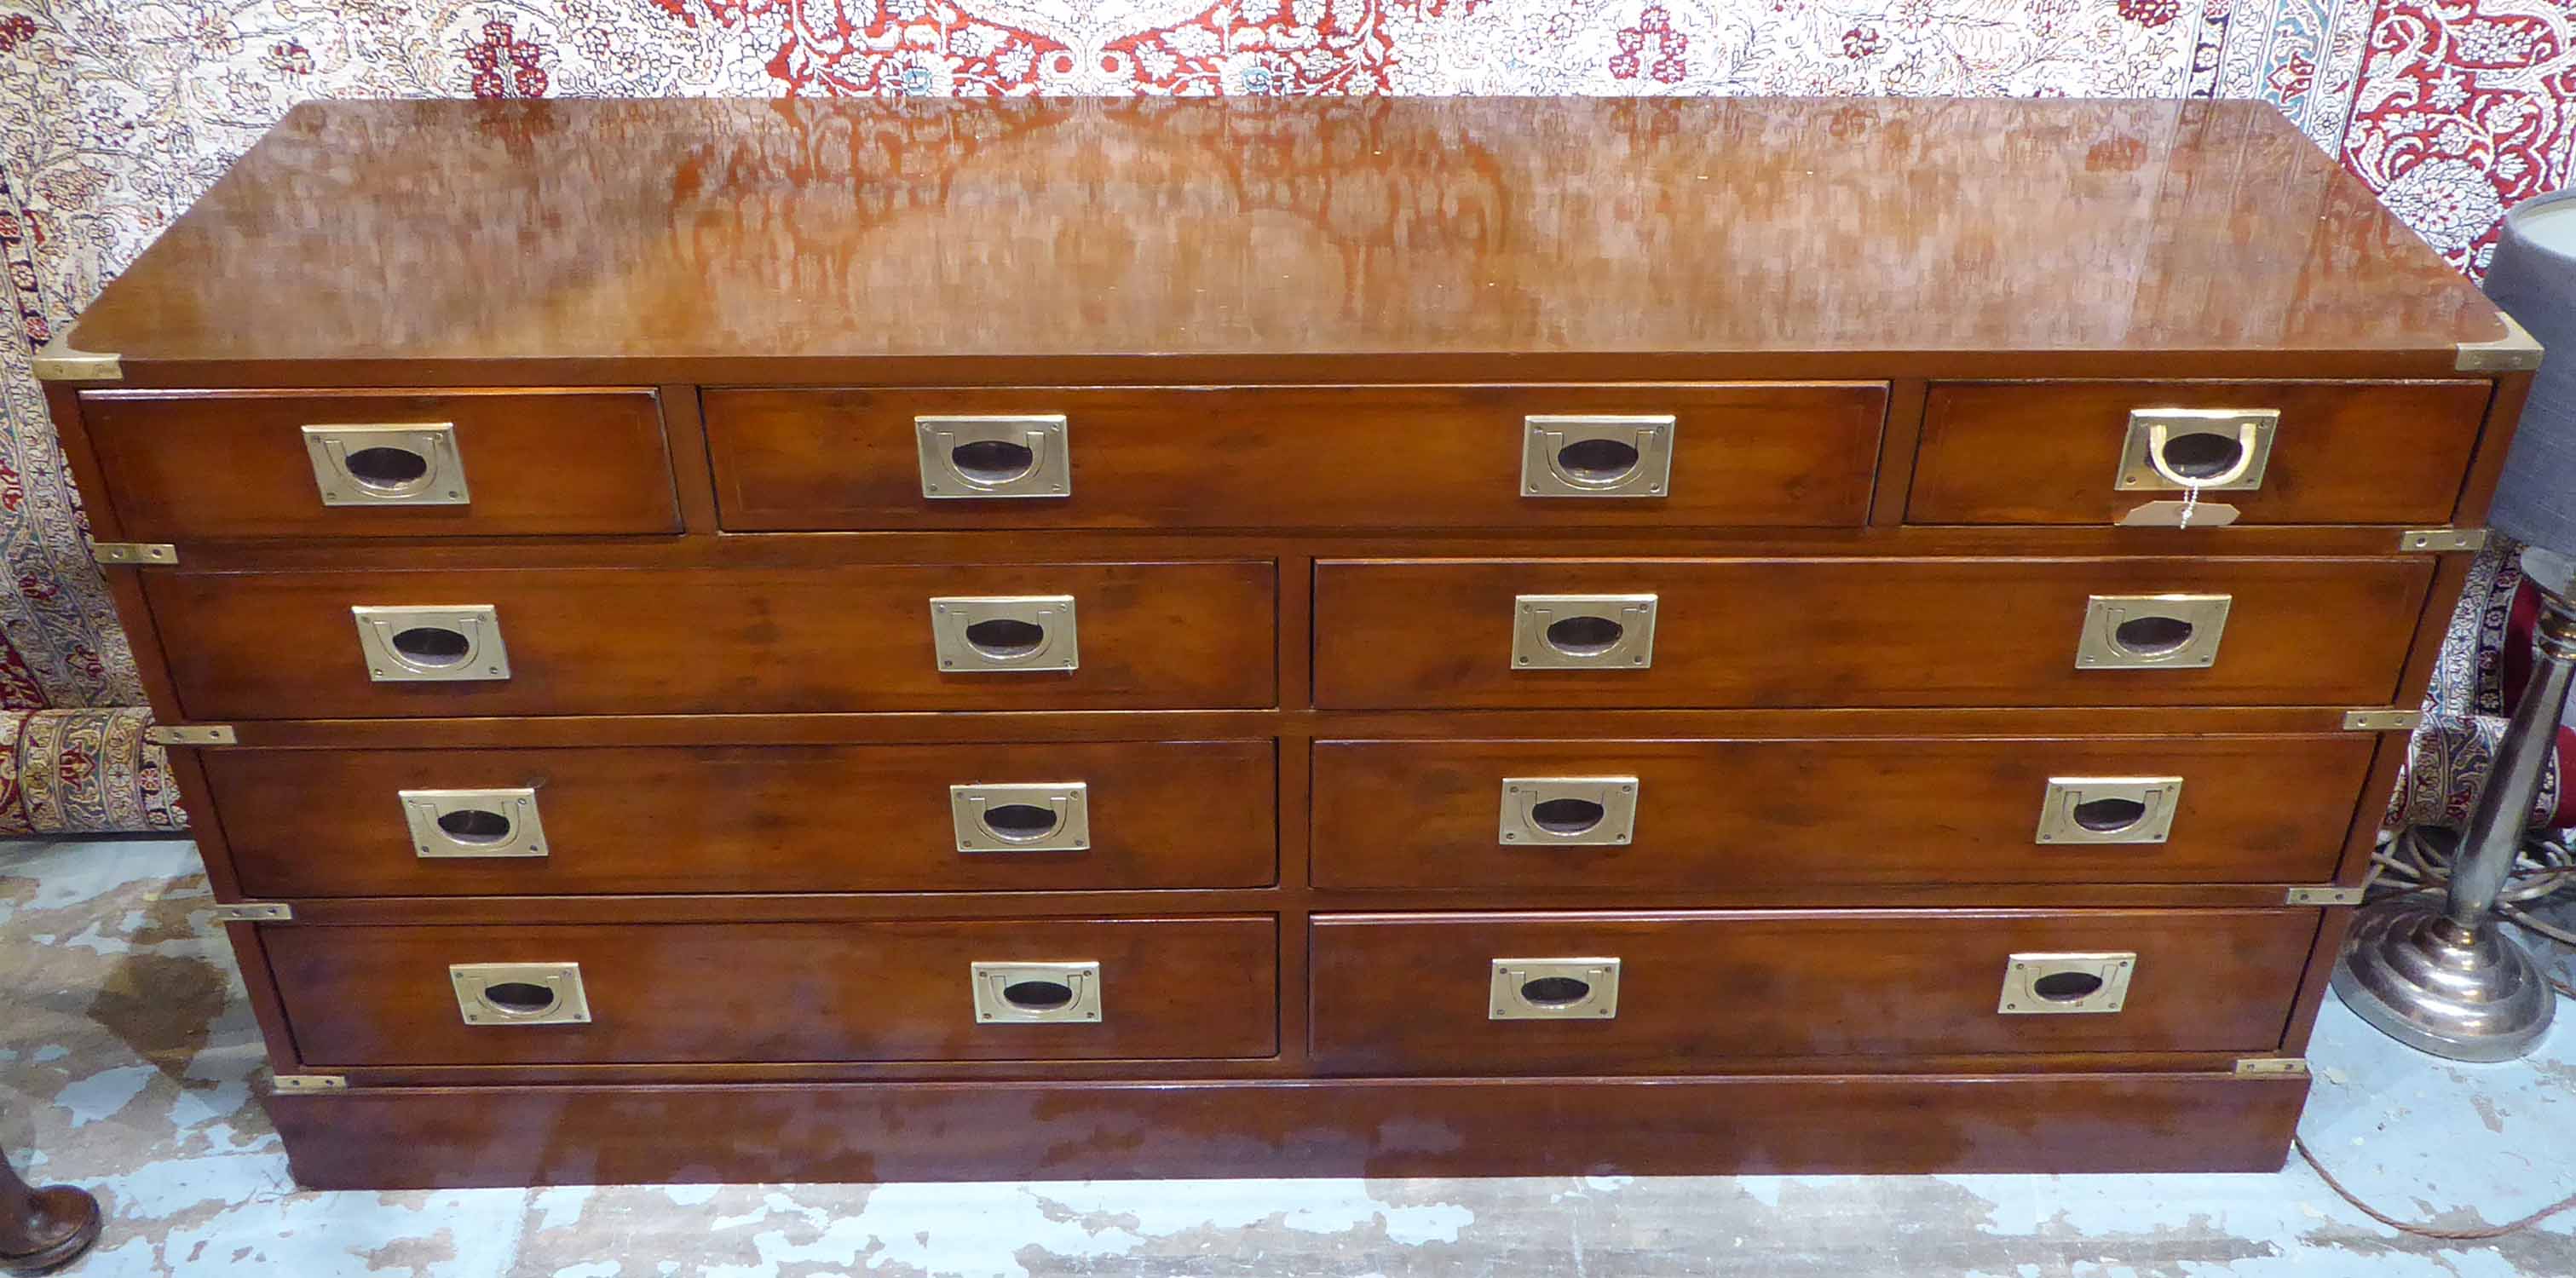 CAMPAIGN STYLE CHEST, yewwood and brass bound having nine drawers, 150cm x 43cm x 70cm H.